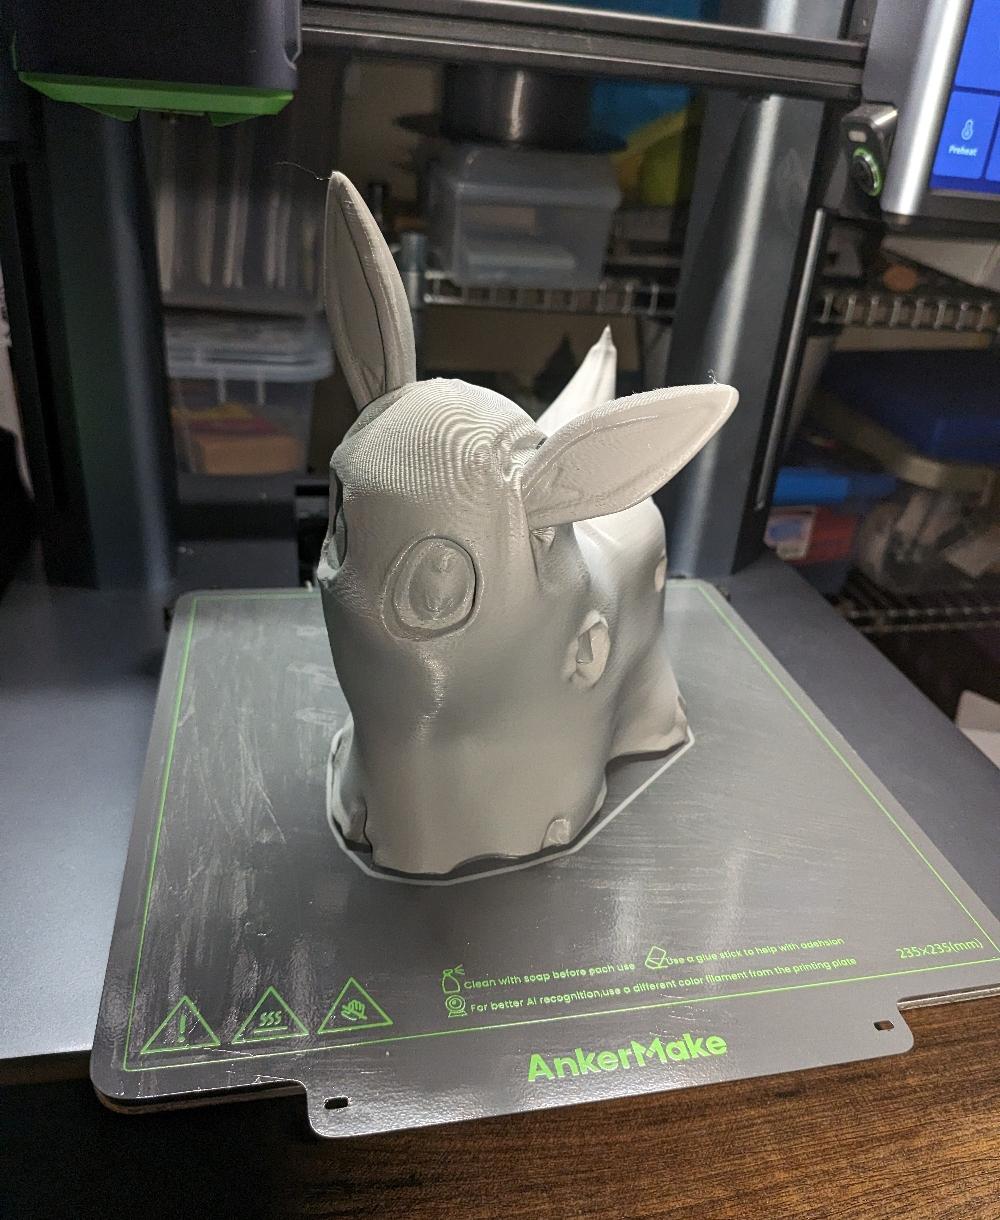 Project Evee v2